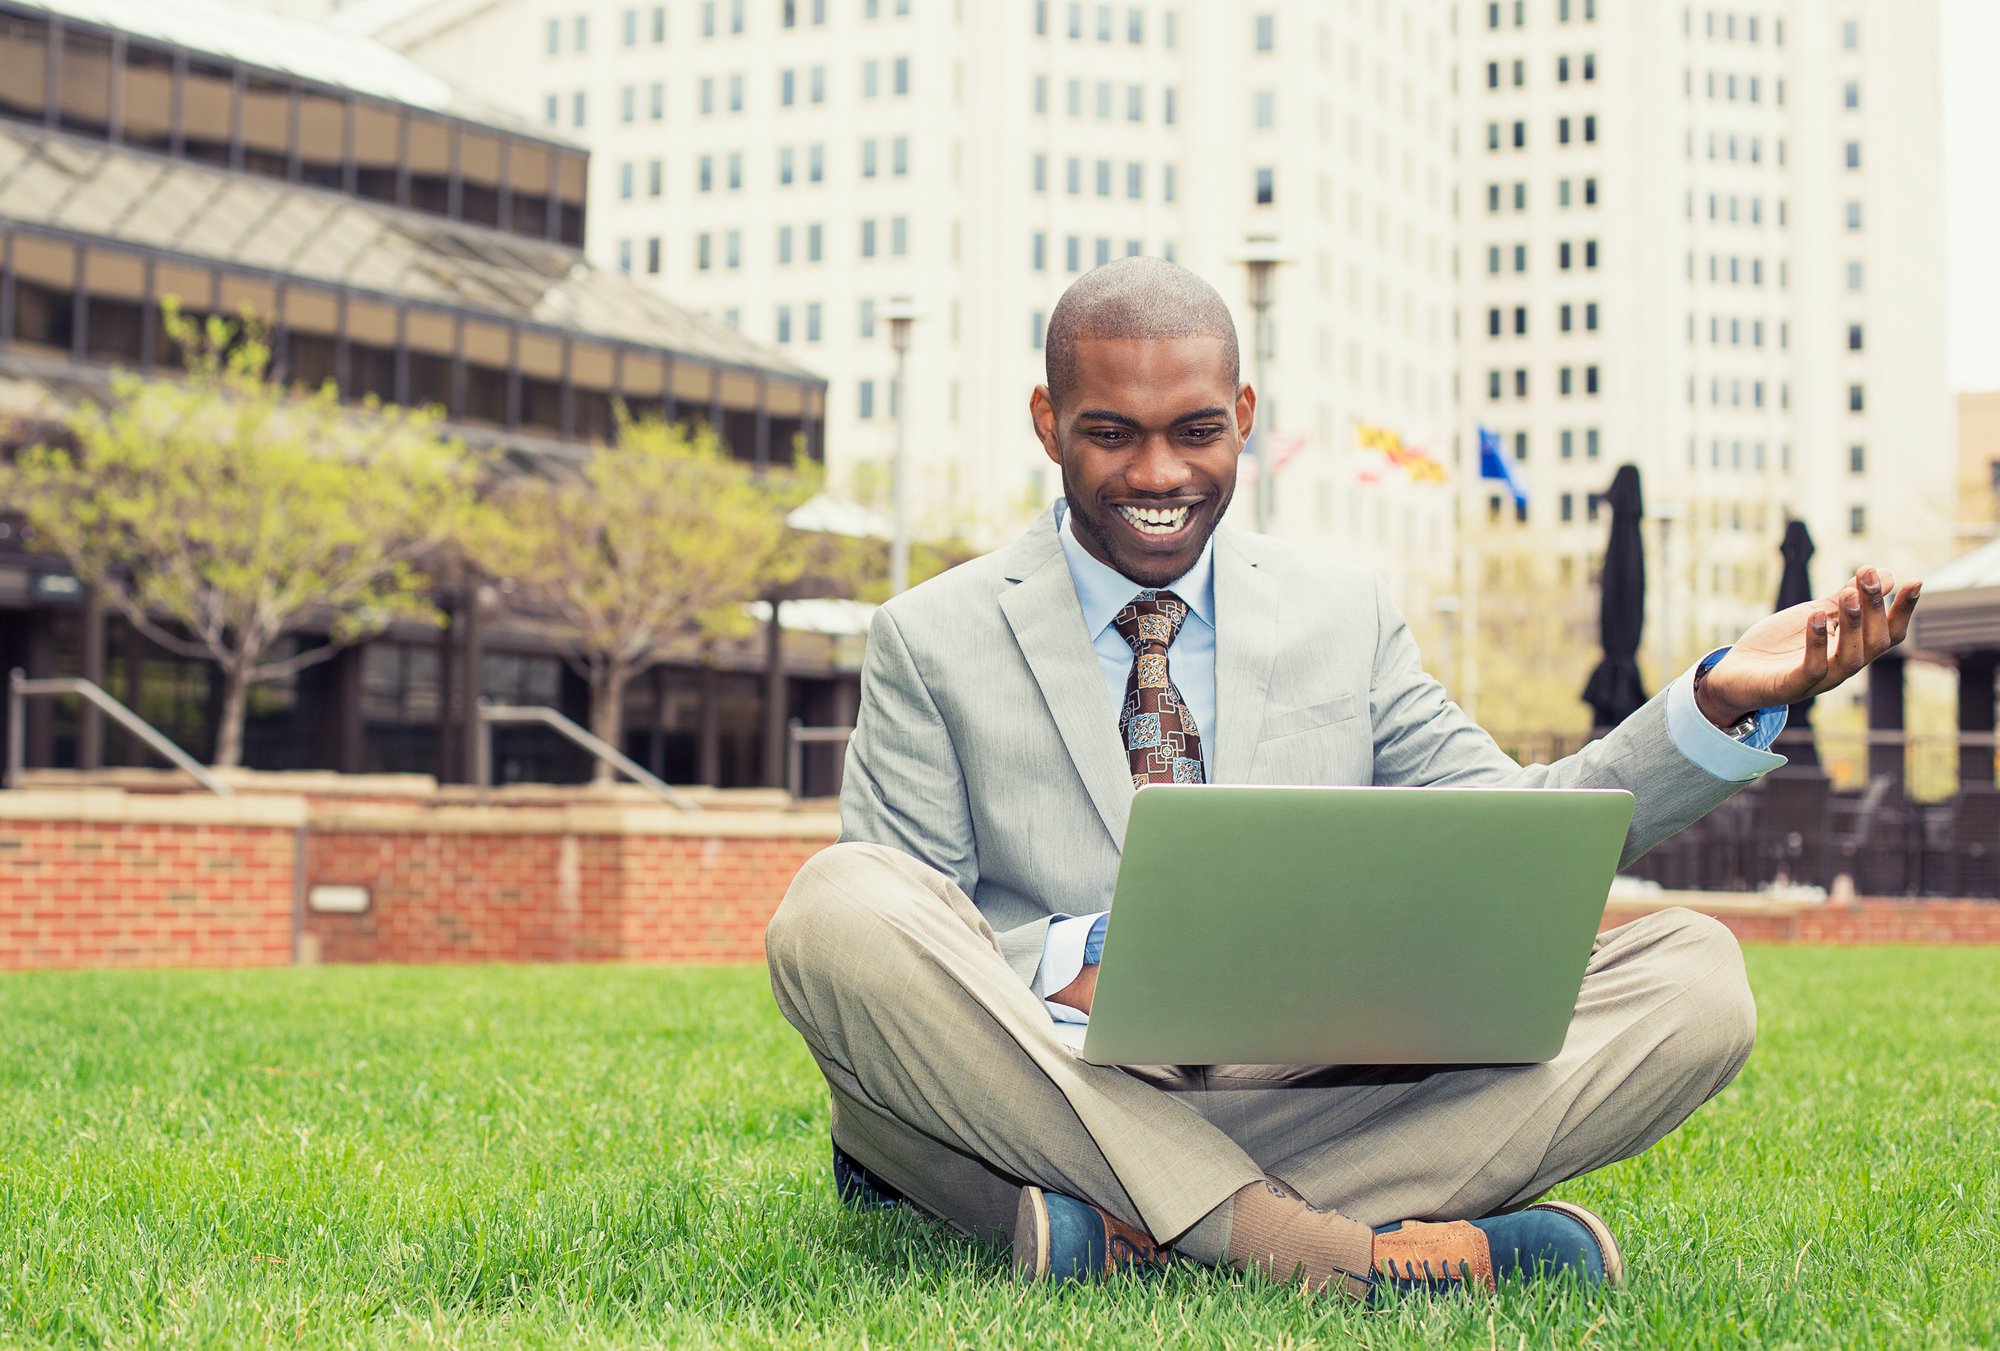 Smiling man with laptop outdoor reading good news email